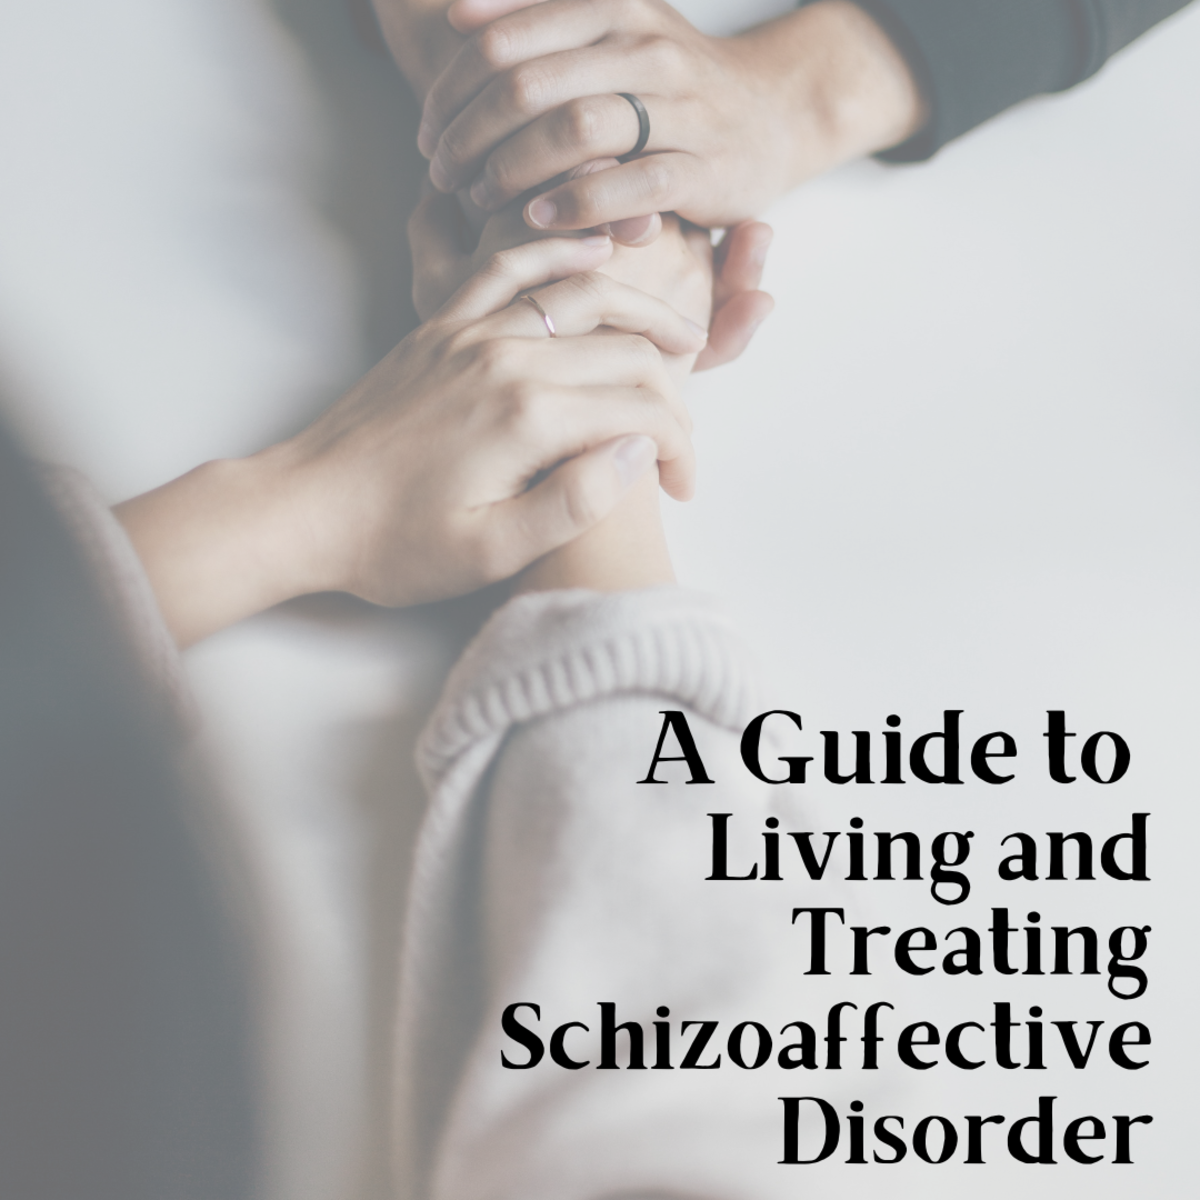 How to Cope With Schizoaffective Disorder